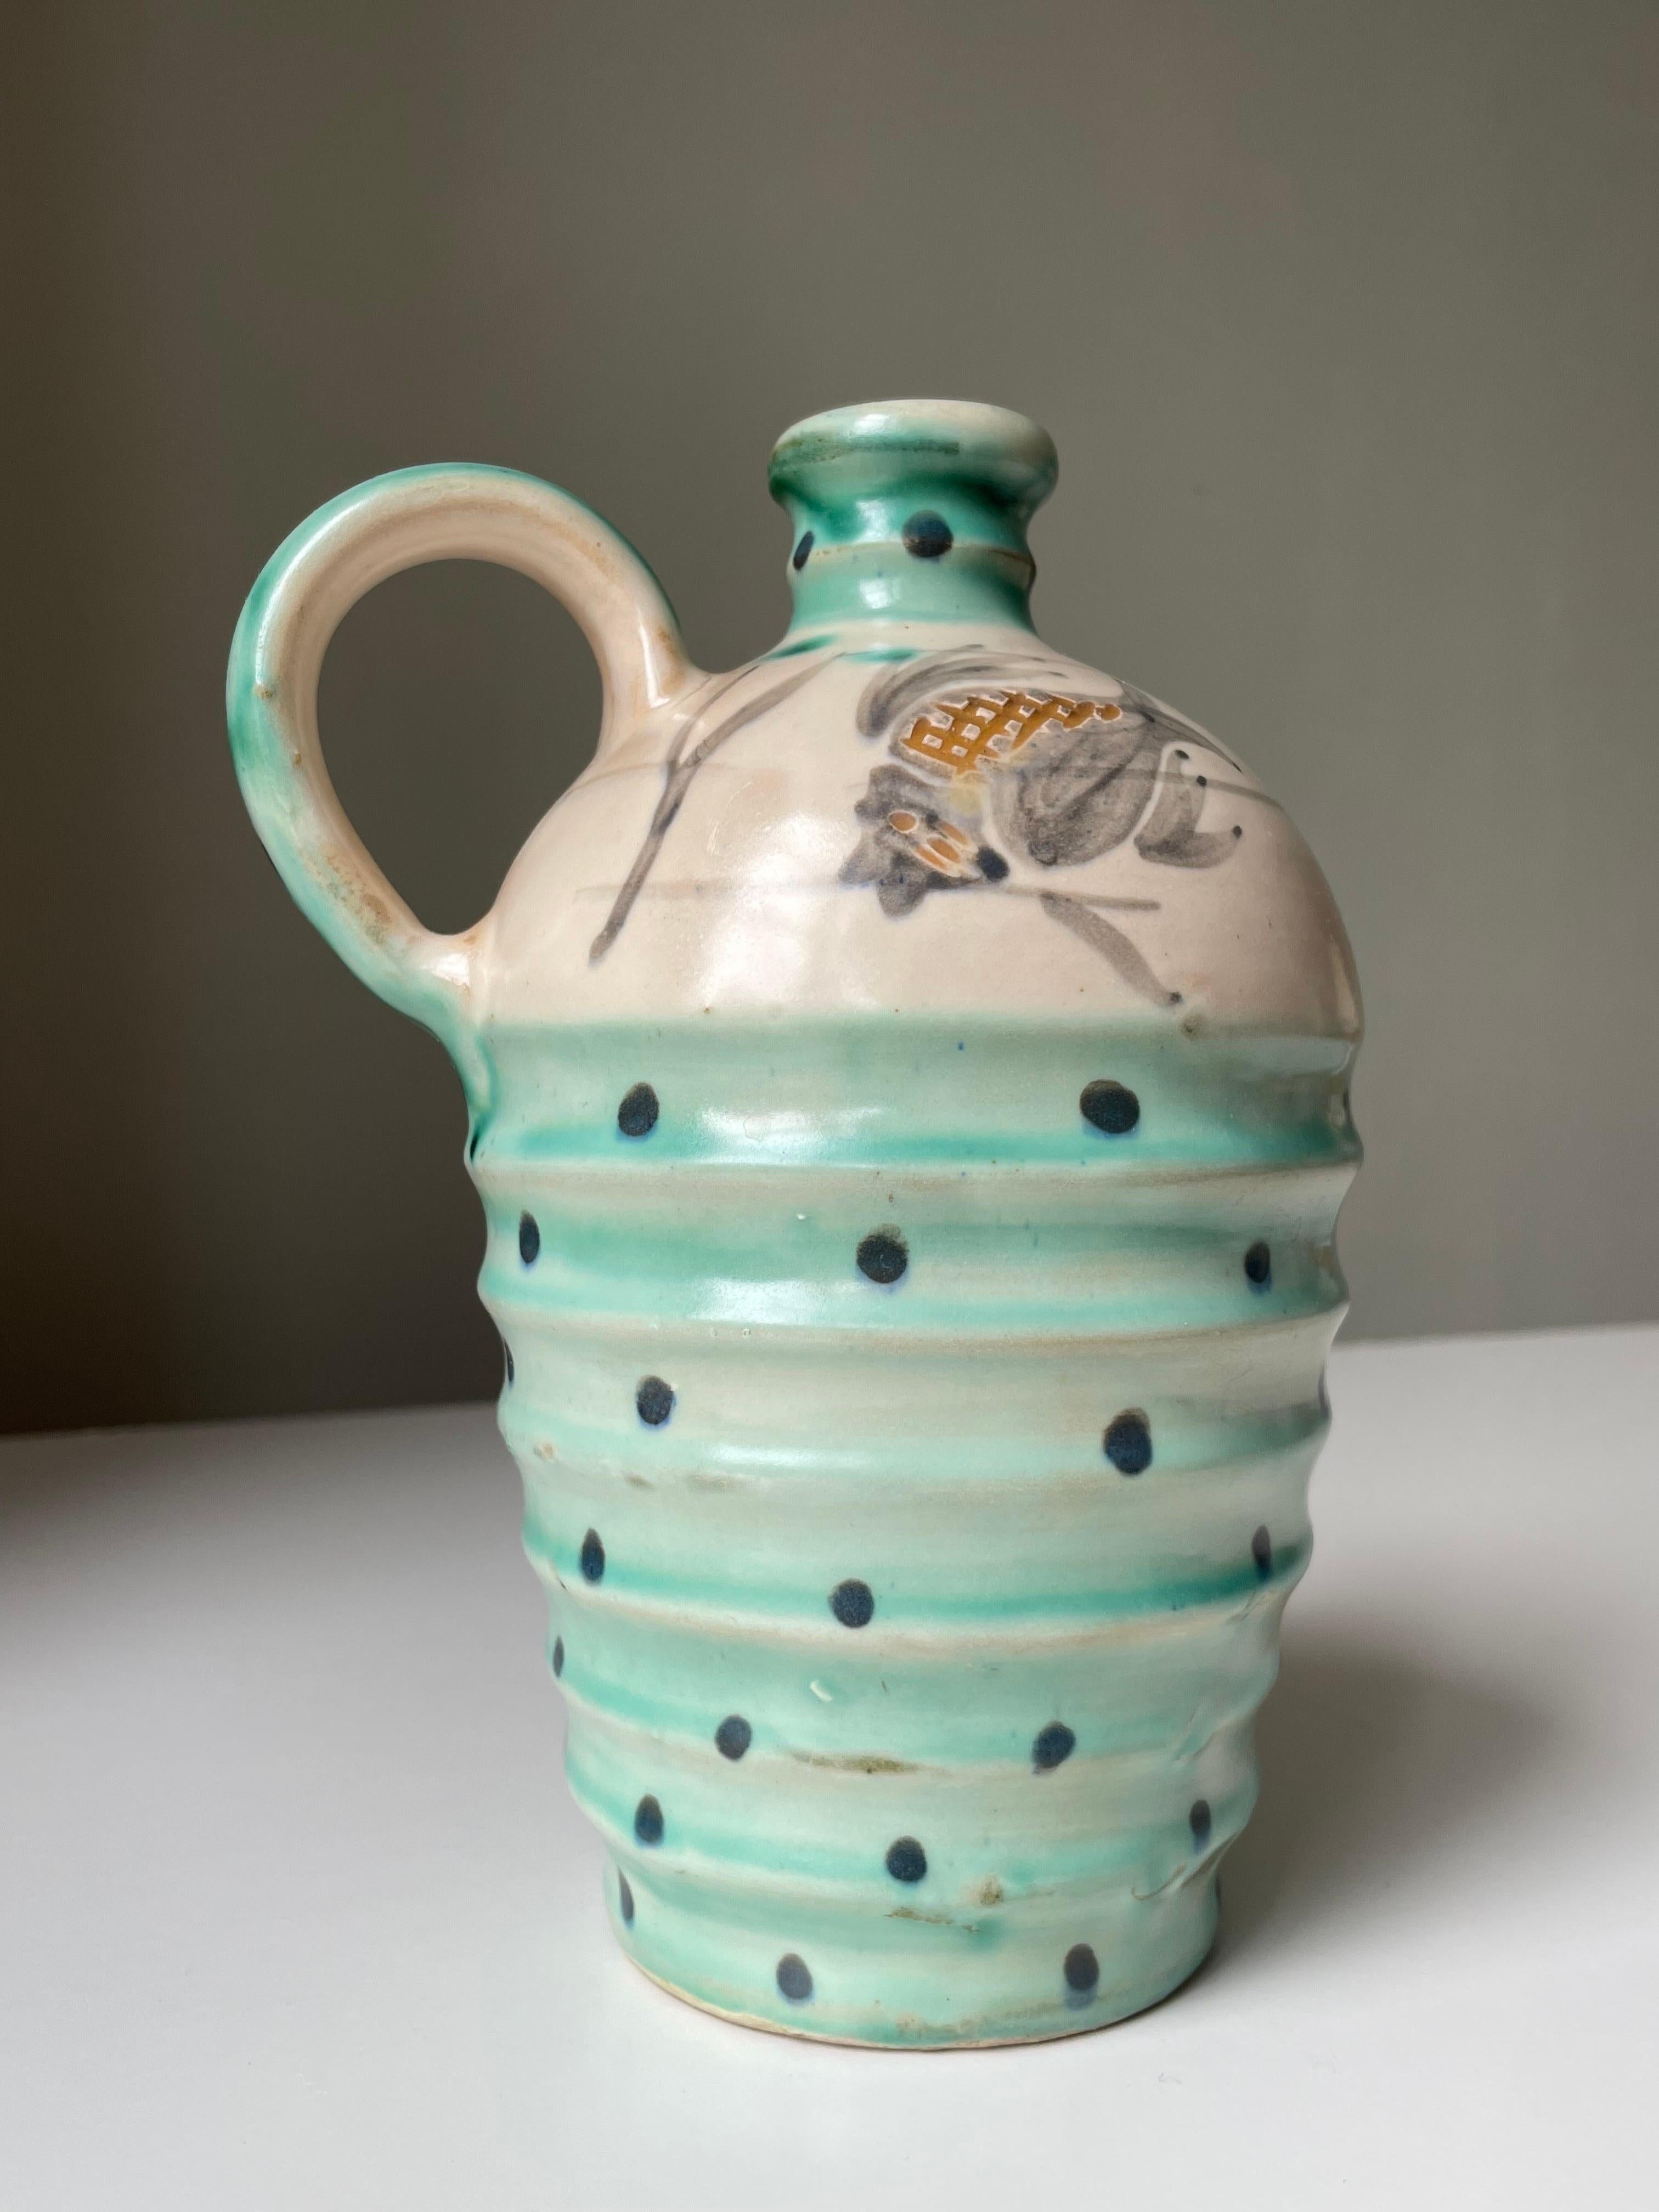 Hand-painted Danish organic modern ceramic pitcher bottle vase with large handle on one side. Rippled body with slender neck and bright sea green glaze with large anthracite dots. Large light gray and brown relief striped fish with lined sea grass